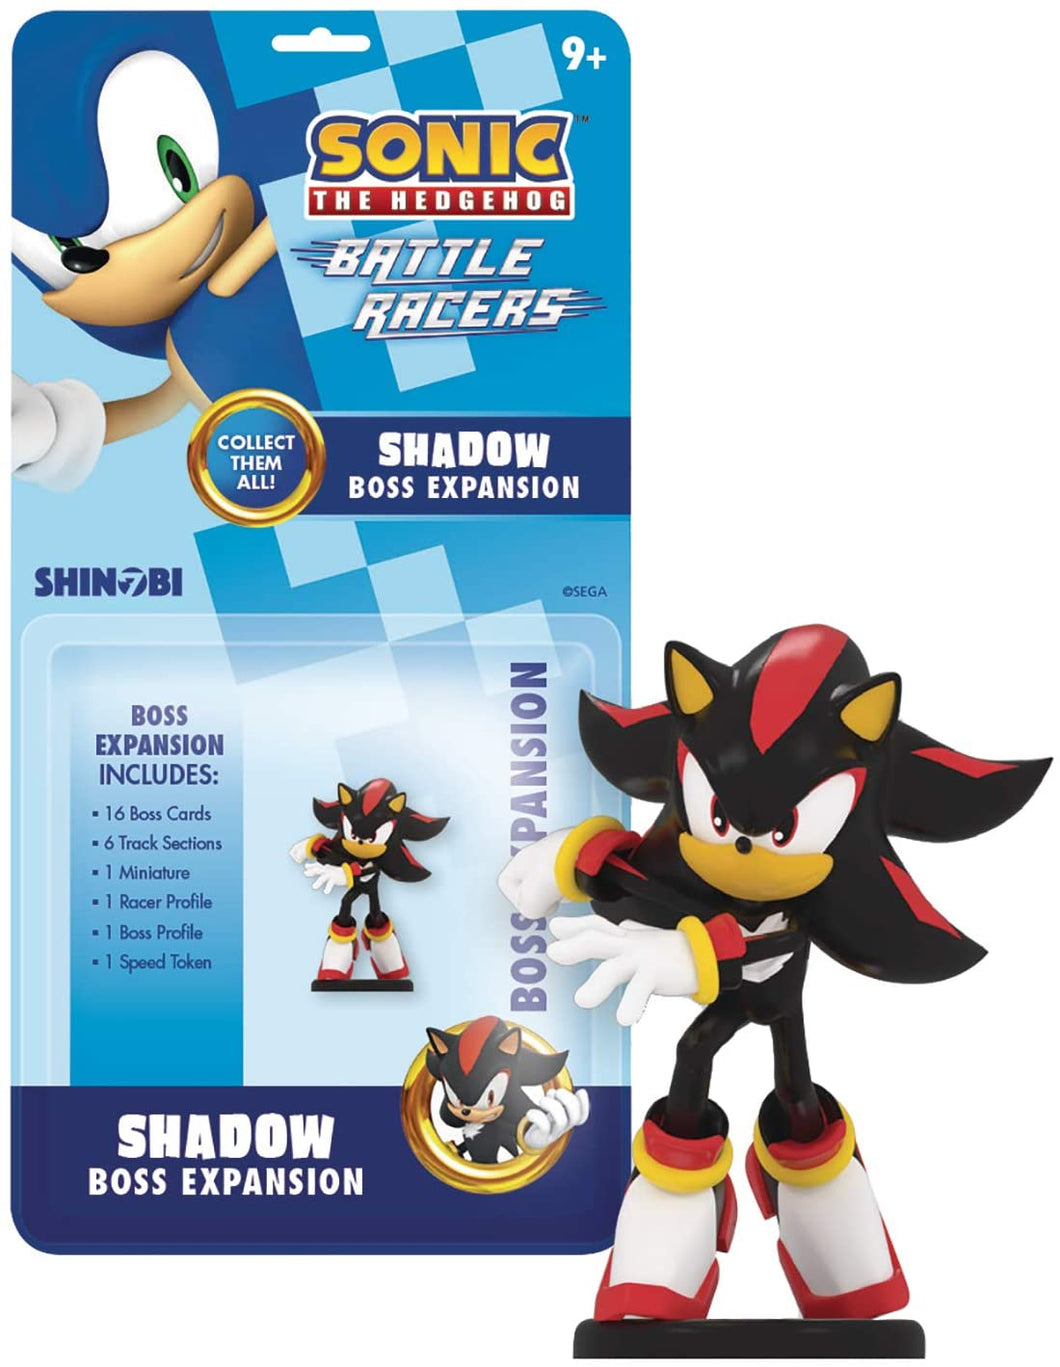 Sonic The Hedgehog: Battle Racers Boss Expansion - Shadow